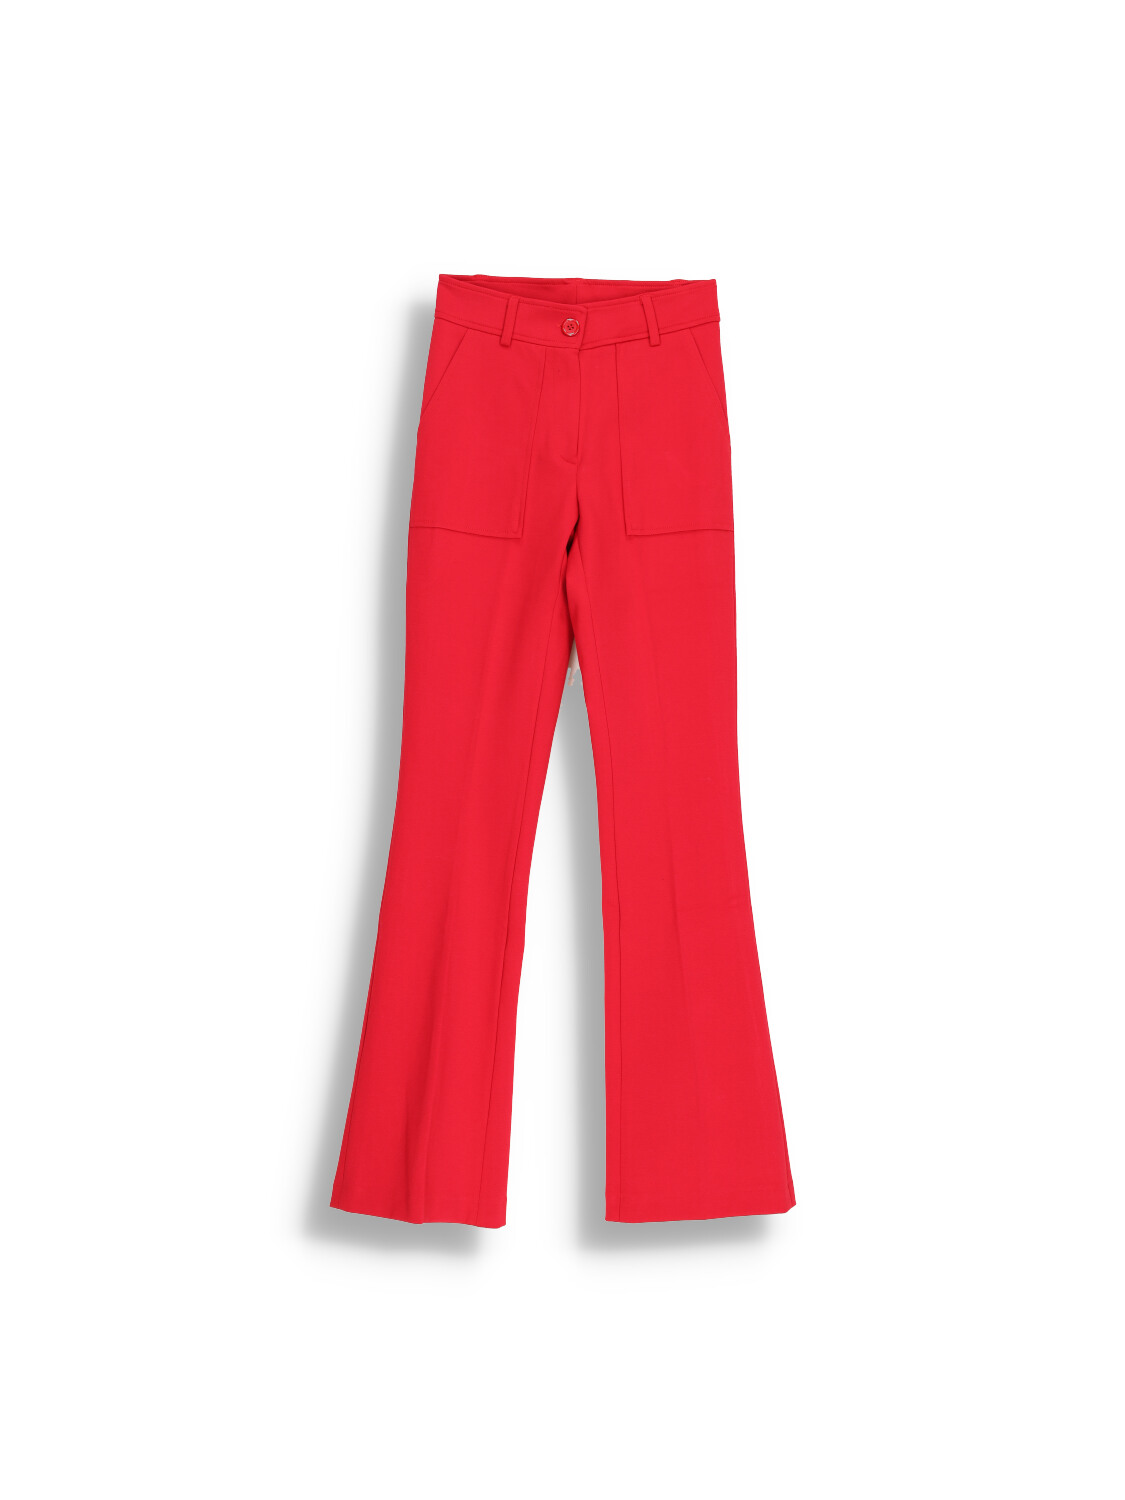 Fabric pants with large pockets